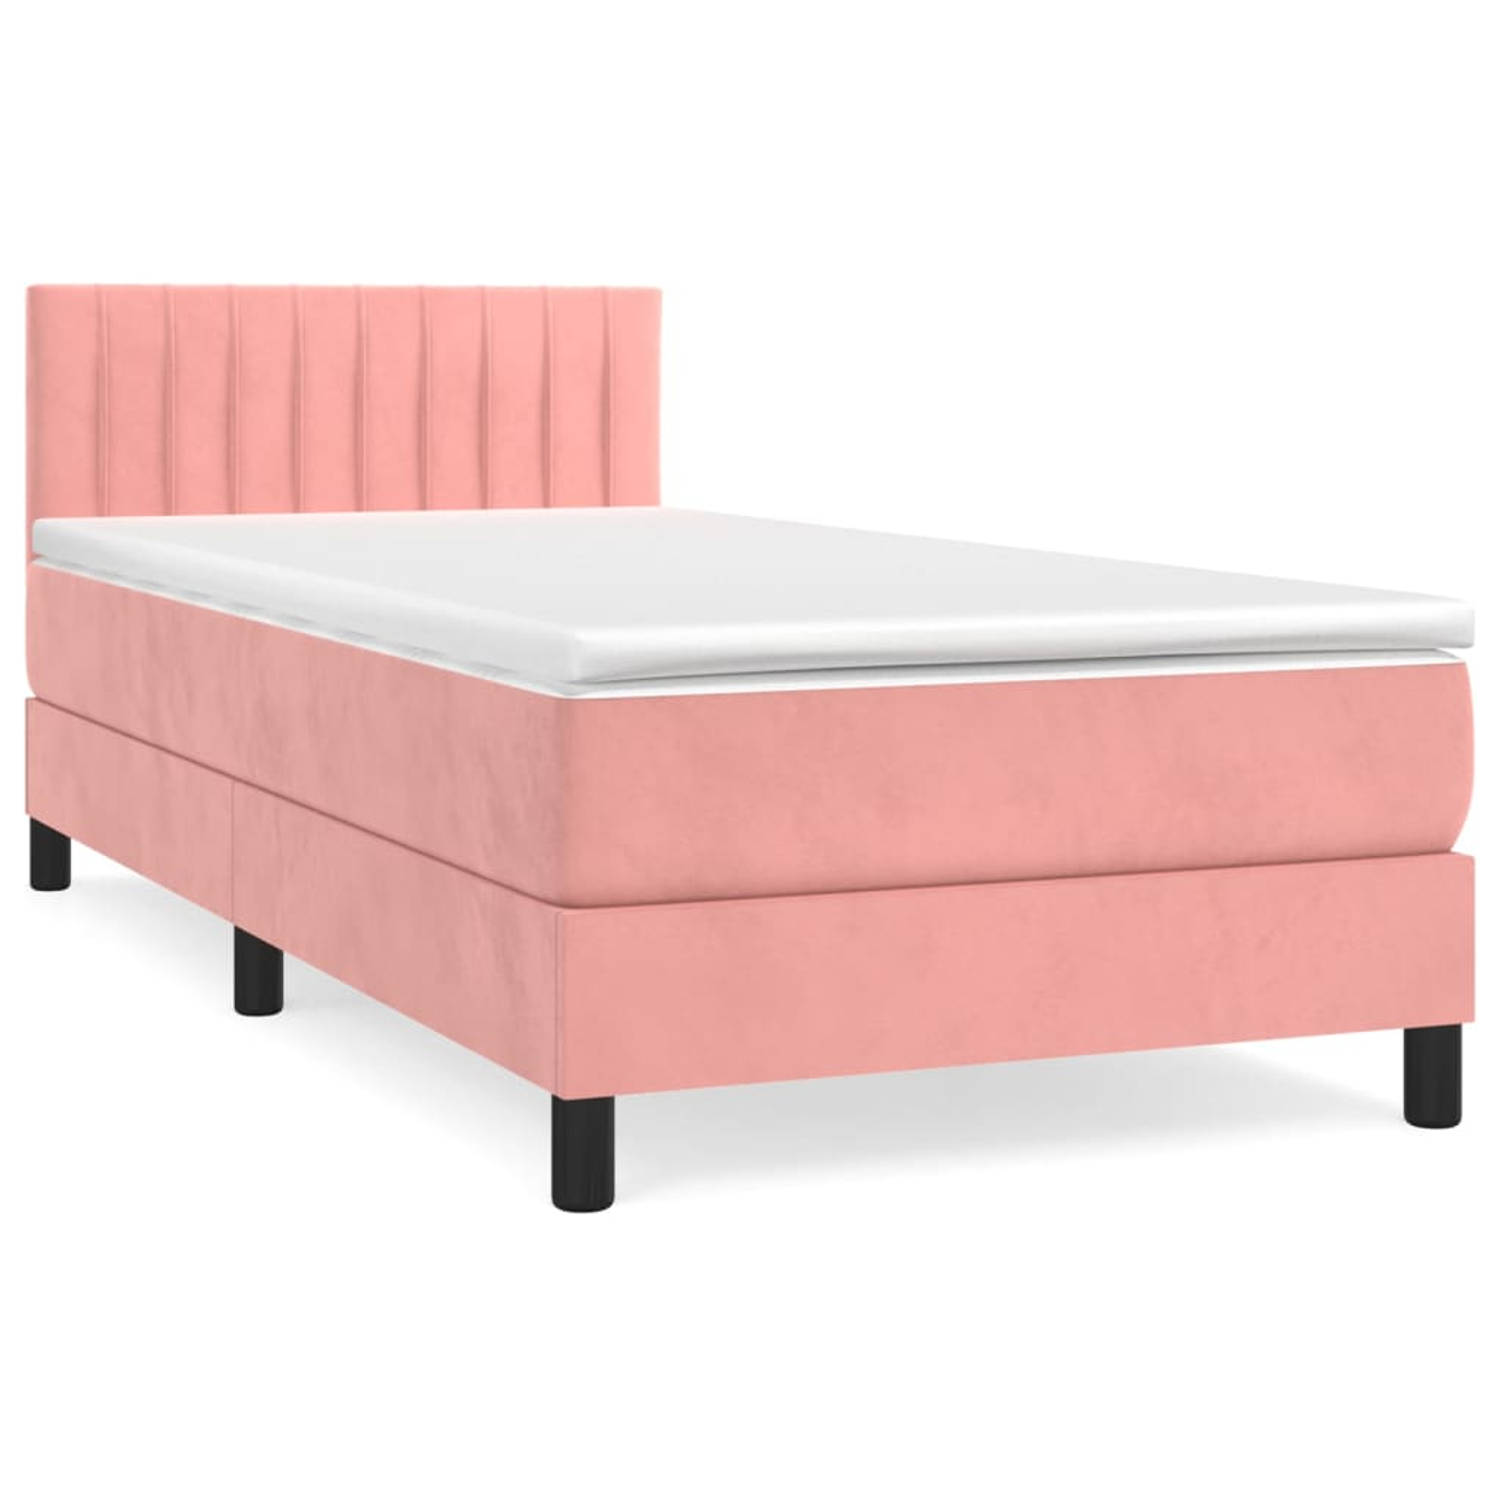 The Living Store Bed - Roze - Stof - 193 x 90 x 78/88 cm - Pocketvering